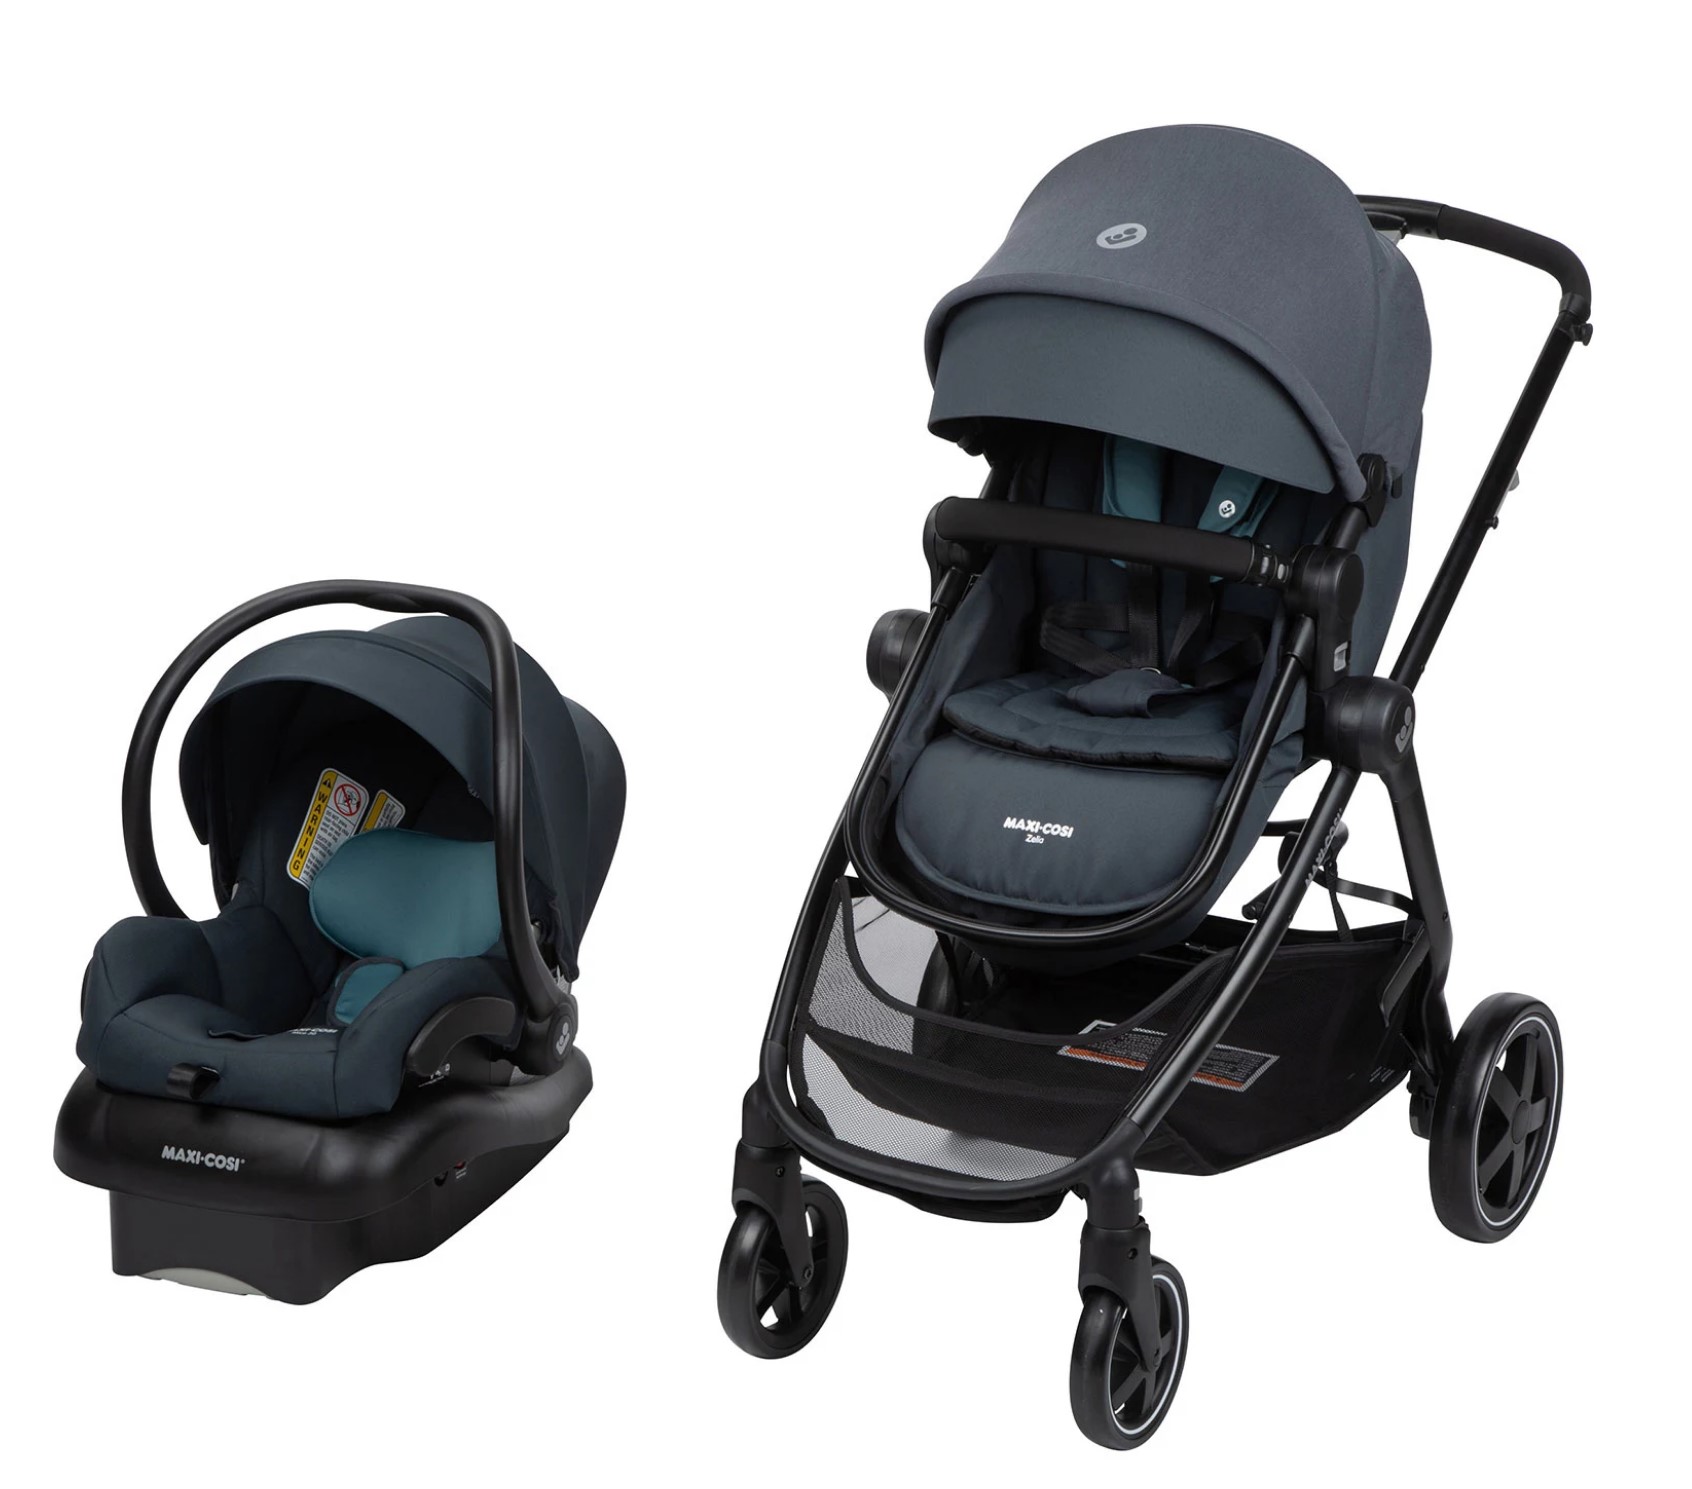 Maxi-Cosi Zelia 5-in-1 Modular Travel System $229.91 (Reg $449.99) - Local Pick up only